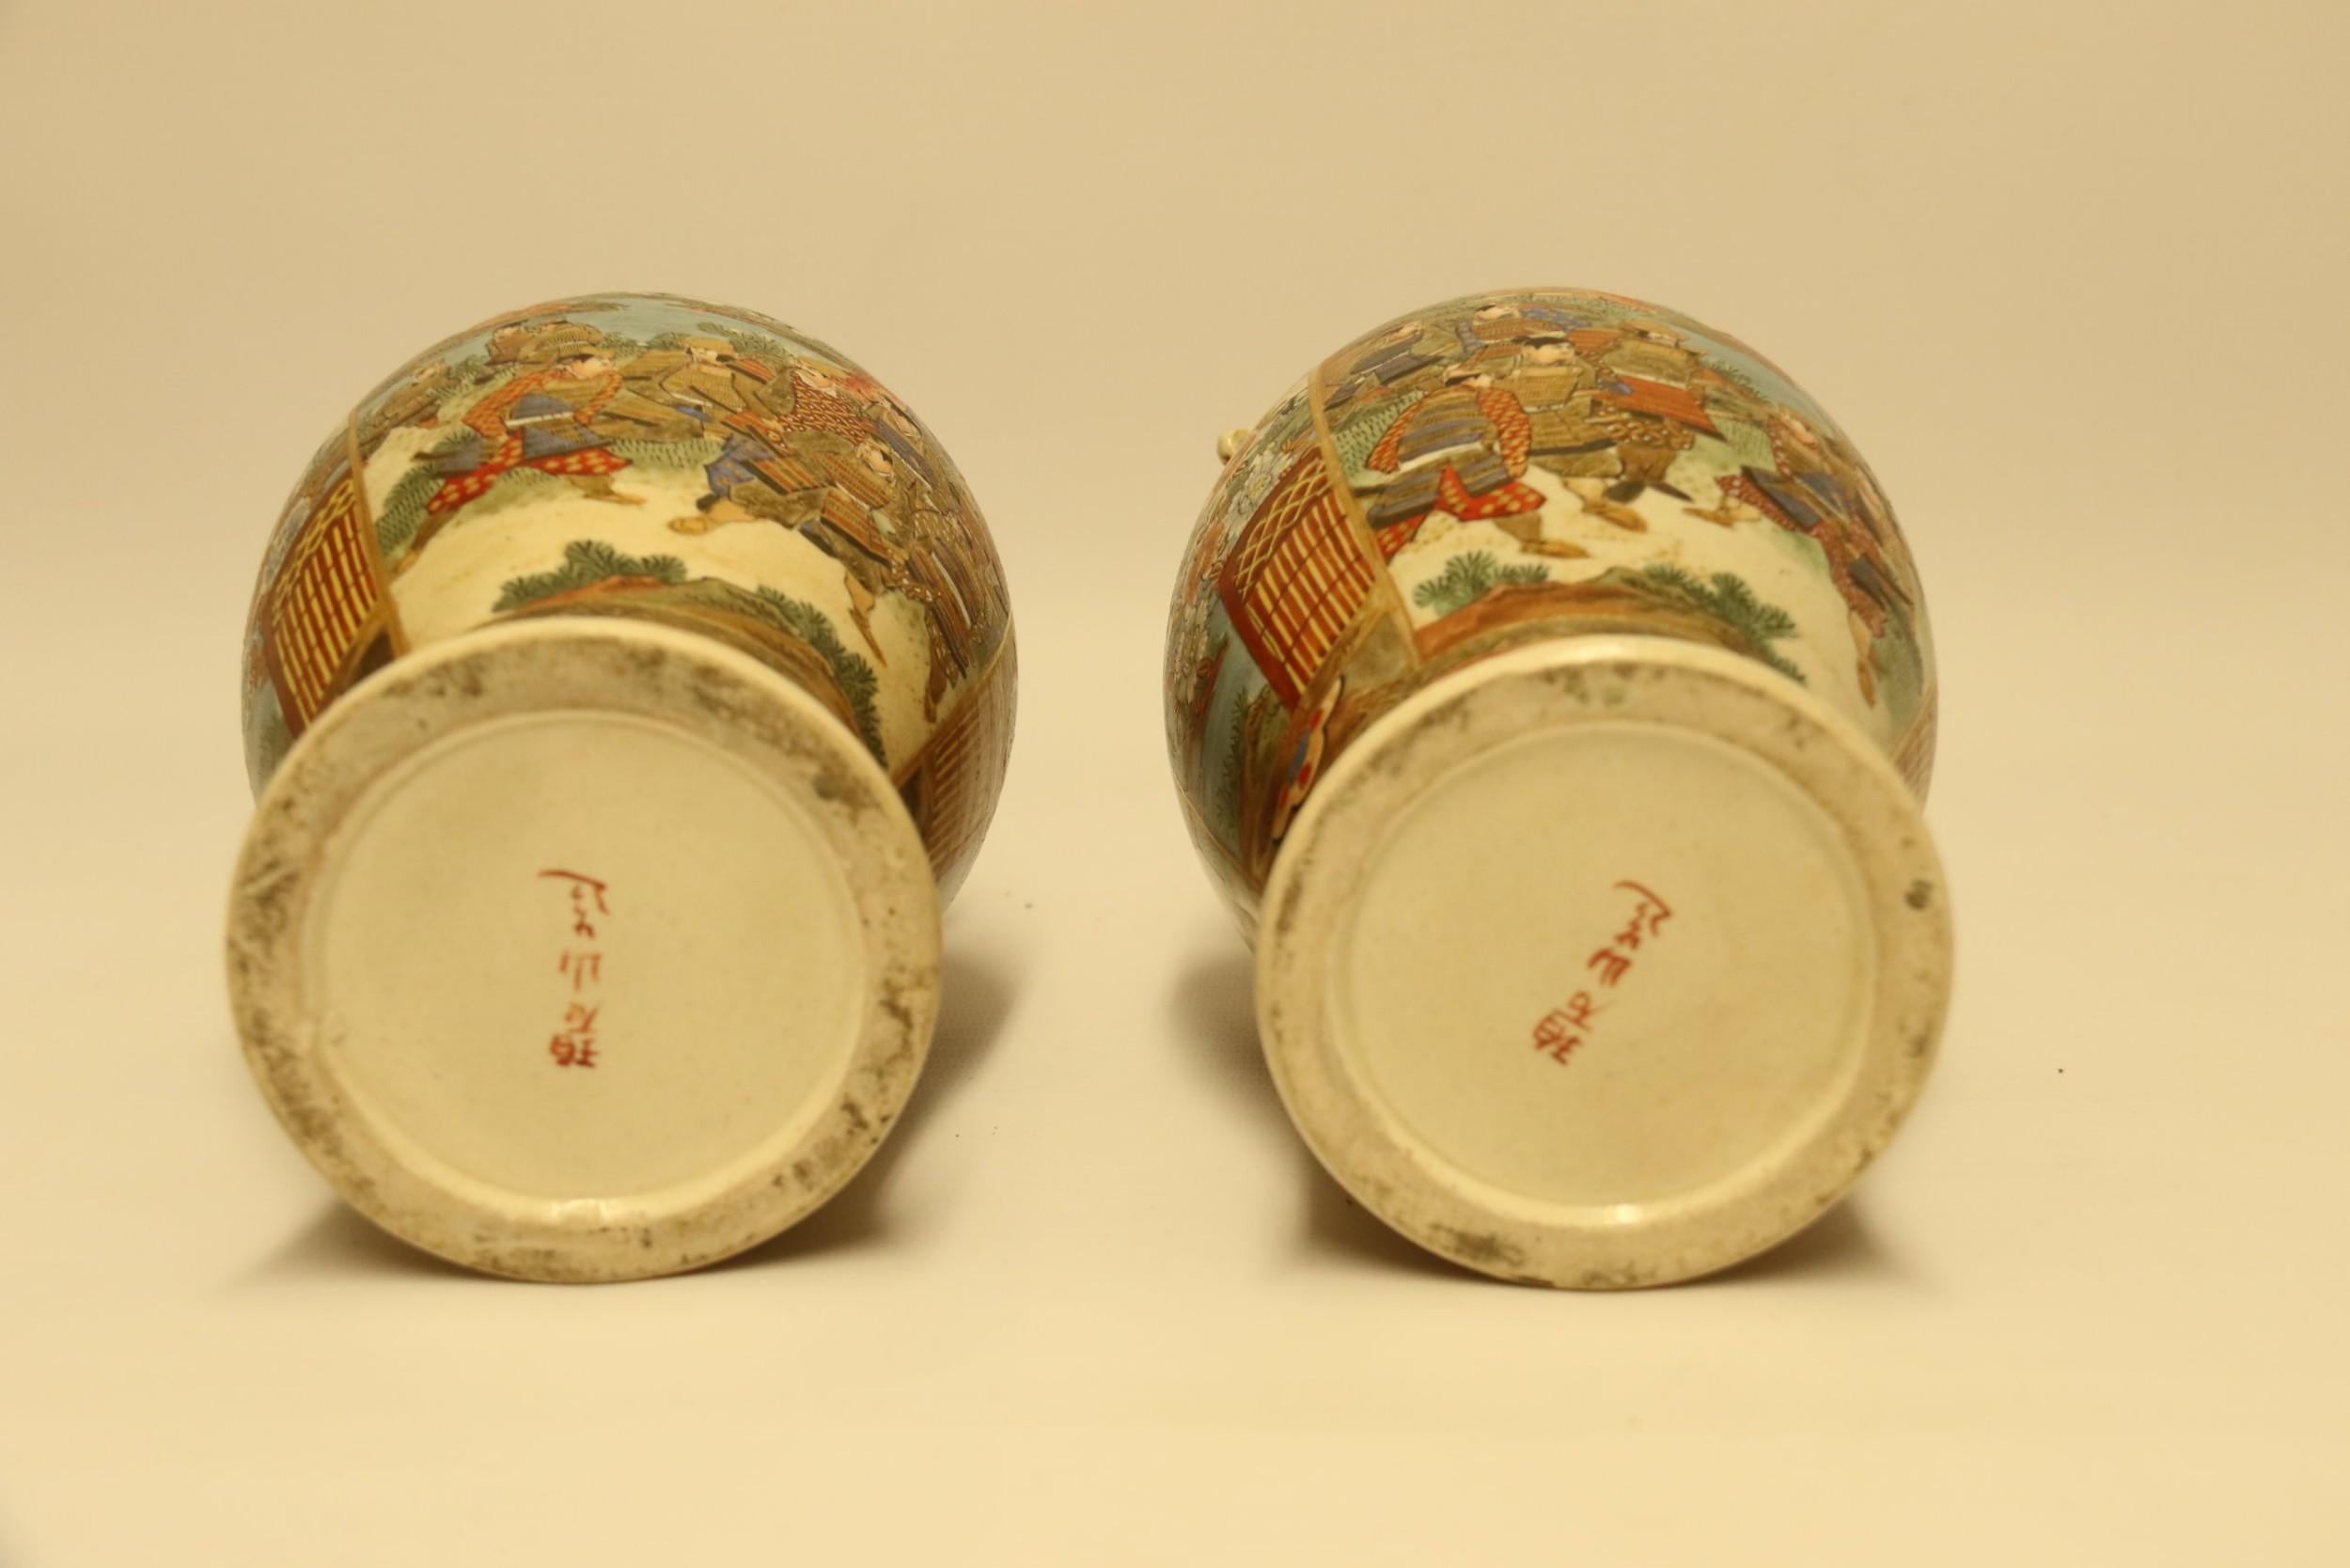 Antique Highly Decorative Pair of Japanese Satsuma Vases, circa 1910 For Sale 7